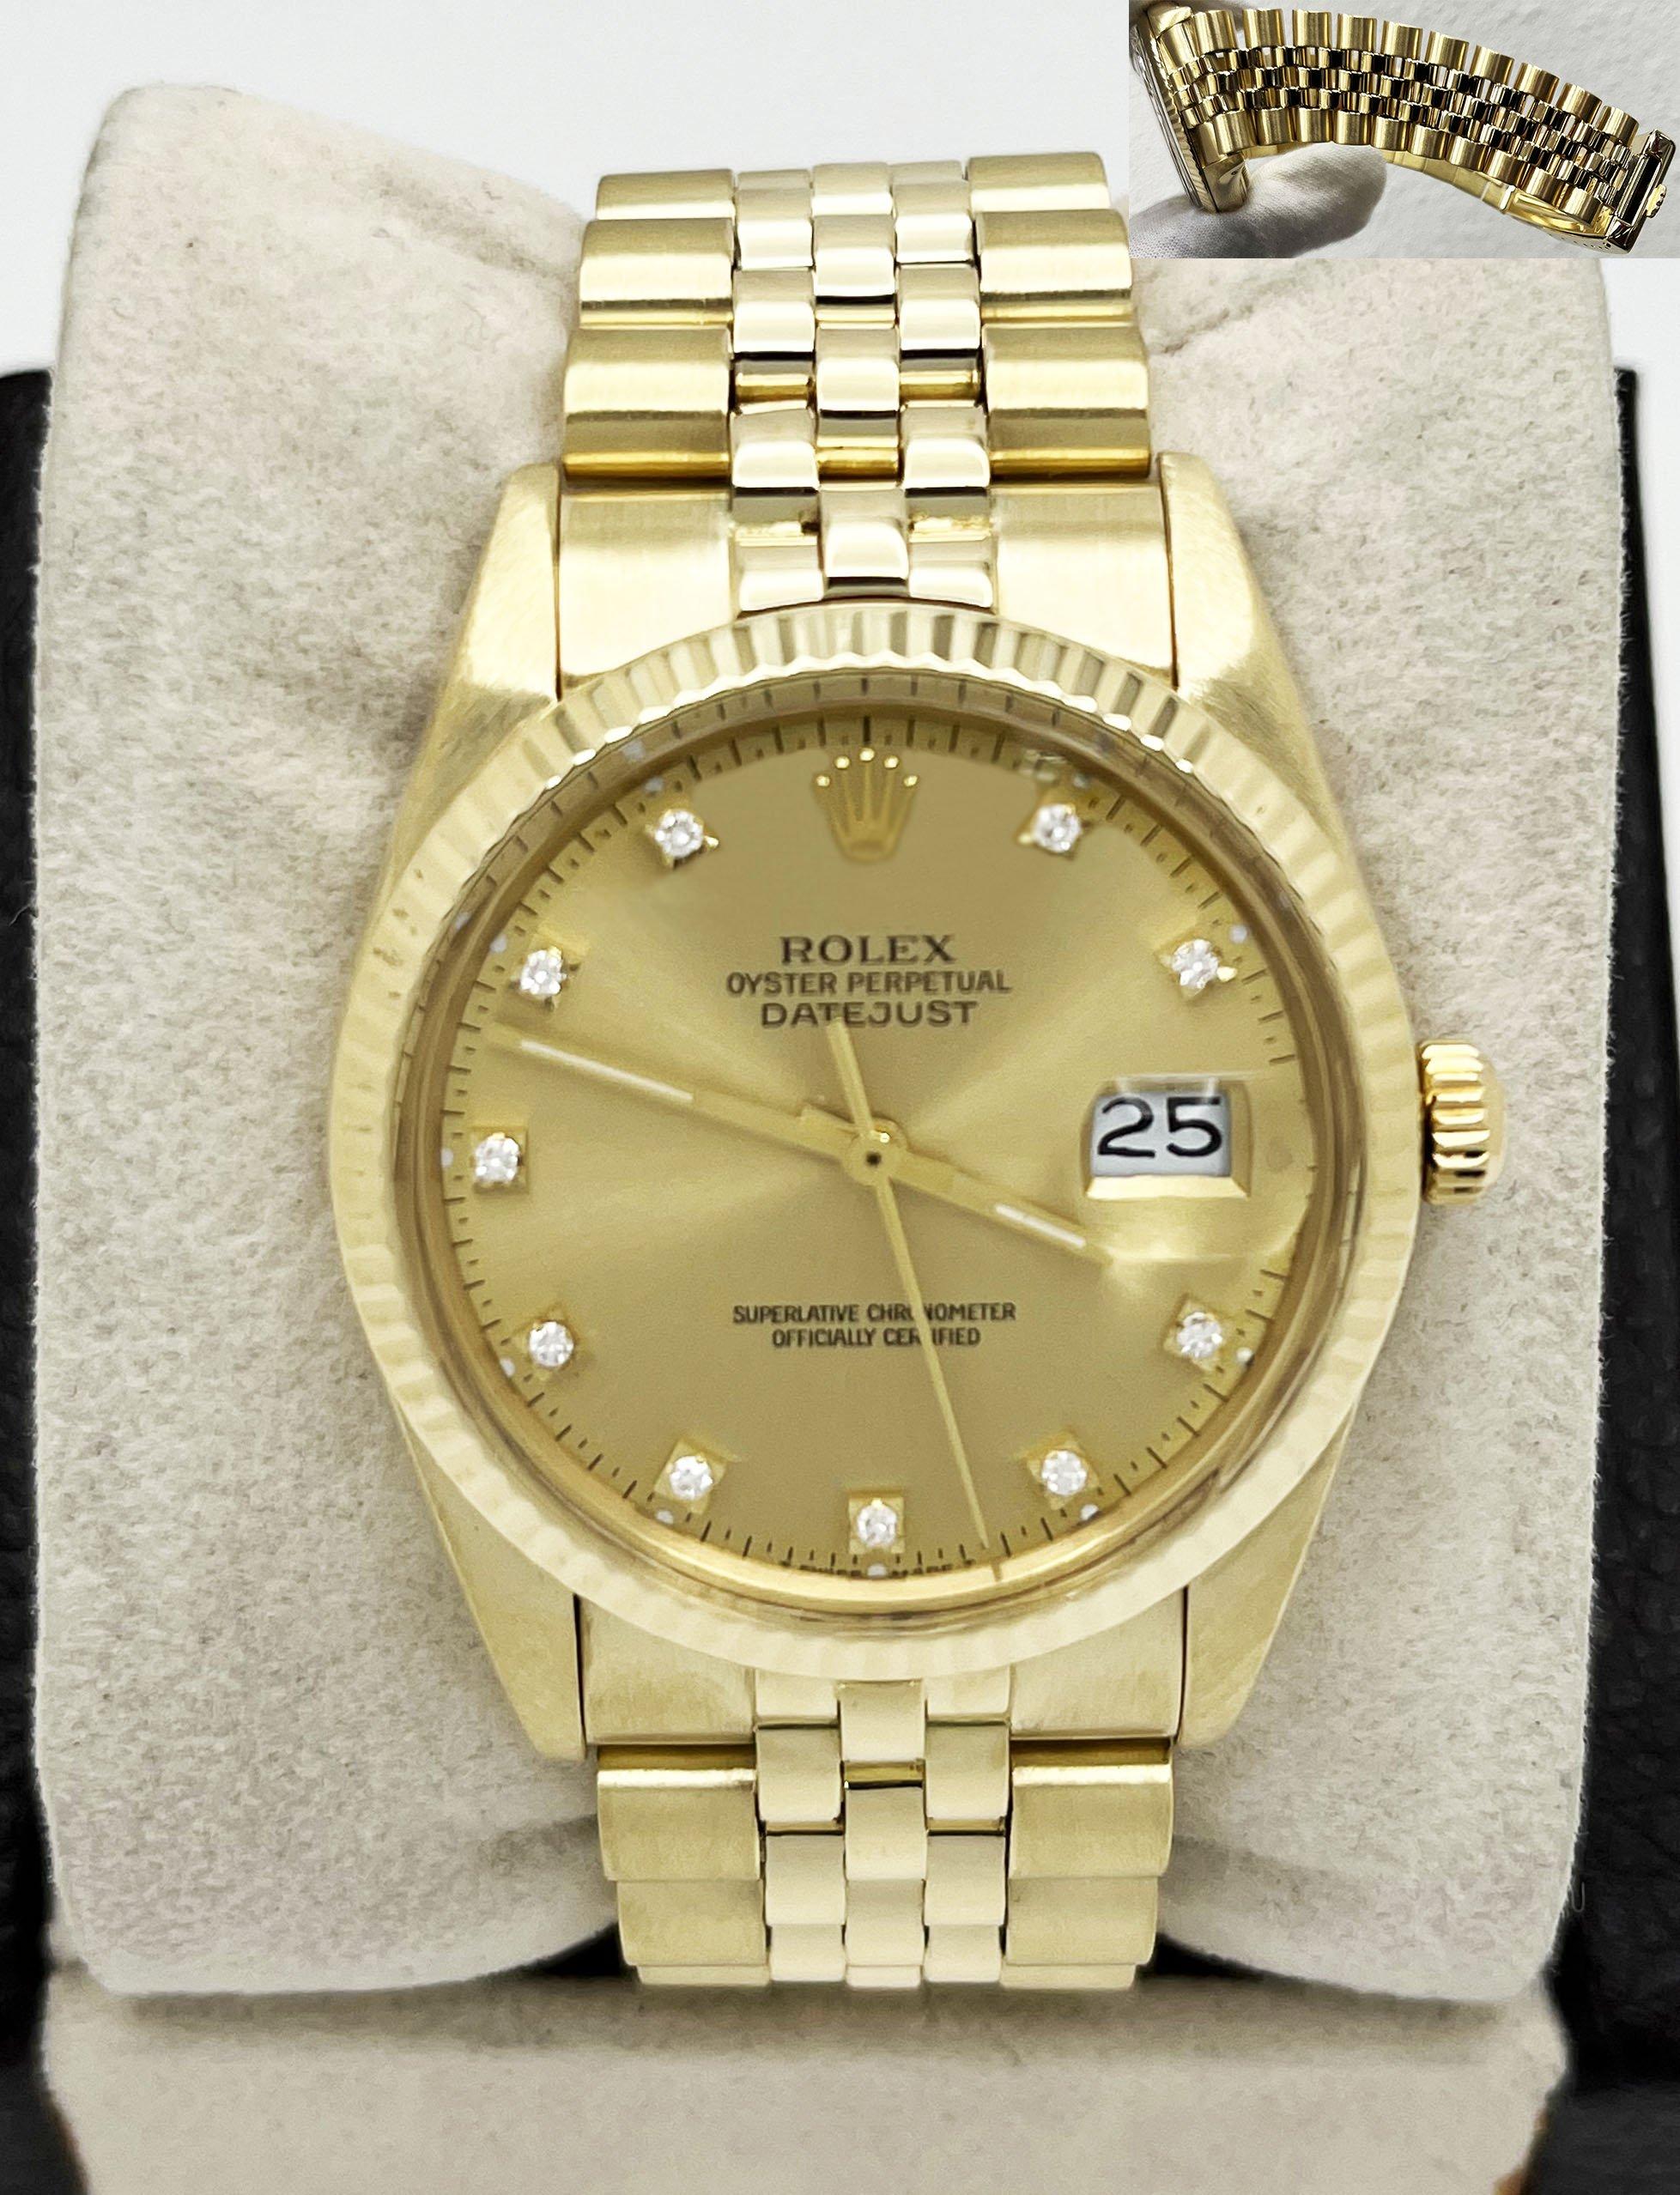 Style Number: 15037

Serial: 9828***

Year: 1986

Model: Date

Case Material: 14K Yellow Gold

Band: 14K Yellow Gold

Bezel: 14K Yellow Gold

Dial: Factory Datejust Champagne Diamond Dial

Face: Acrylic 

Case Size: 34mm

Includes: 

-Elegant Watch